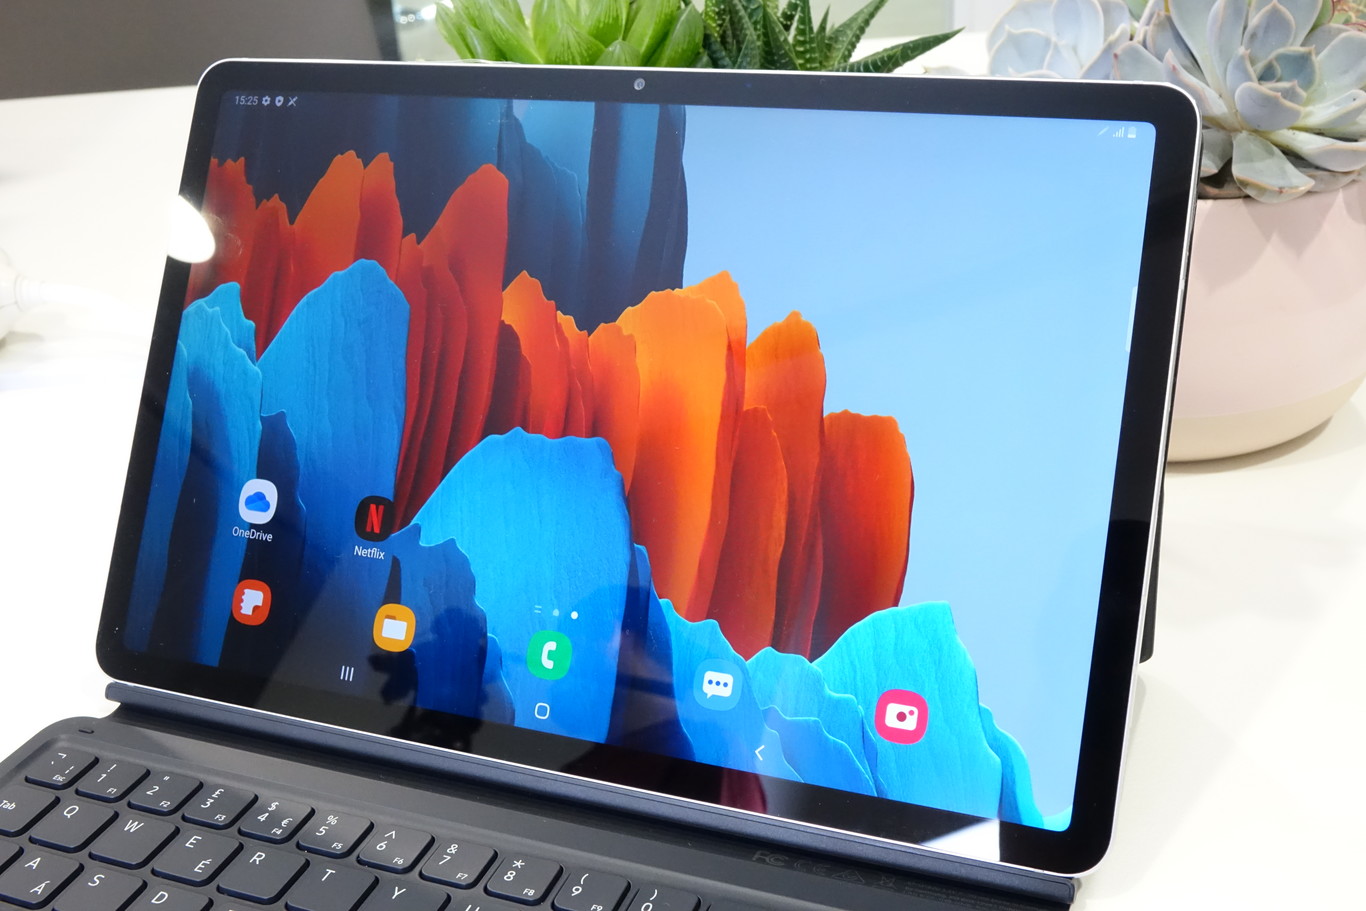 Price and availability of the new Samsung Galaxy Tab S7 and S7+